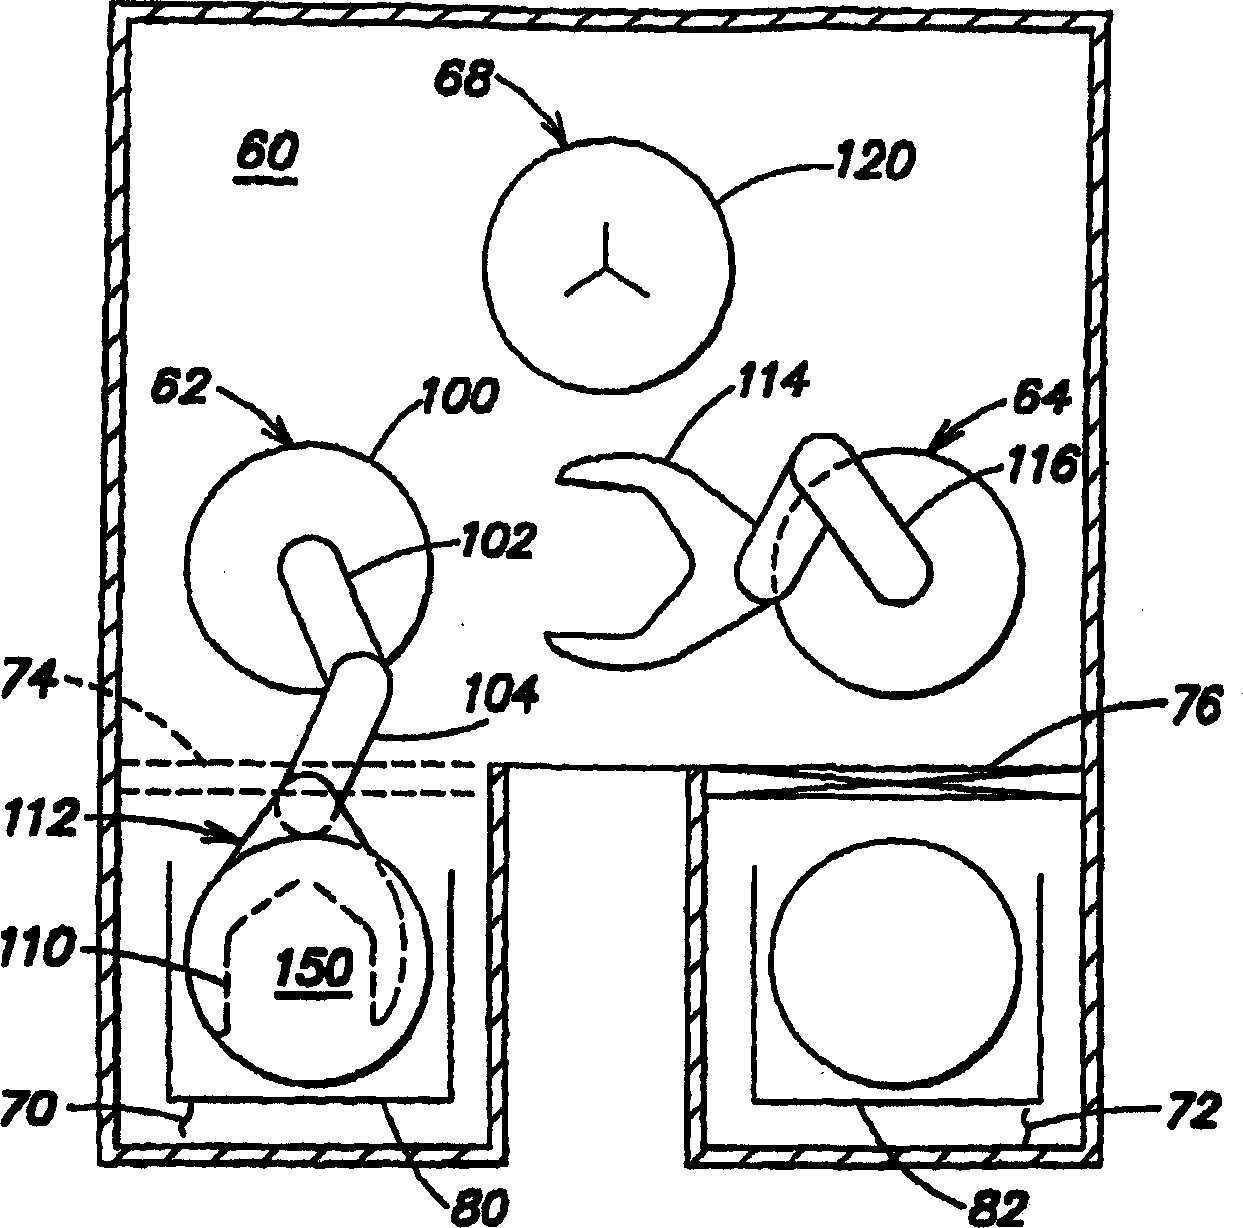 Methods and apparatus for high speed object handling